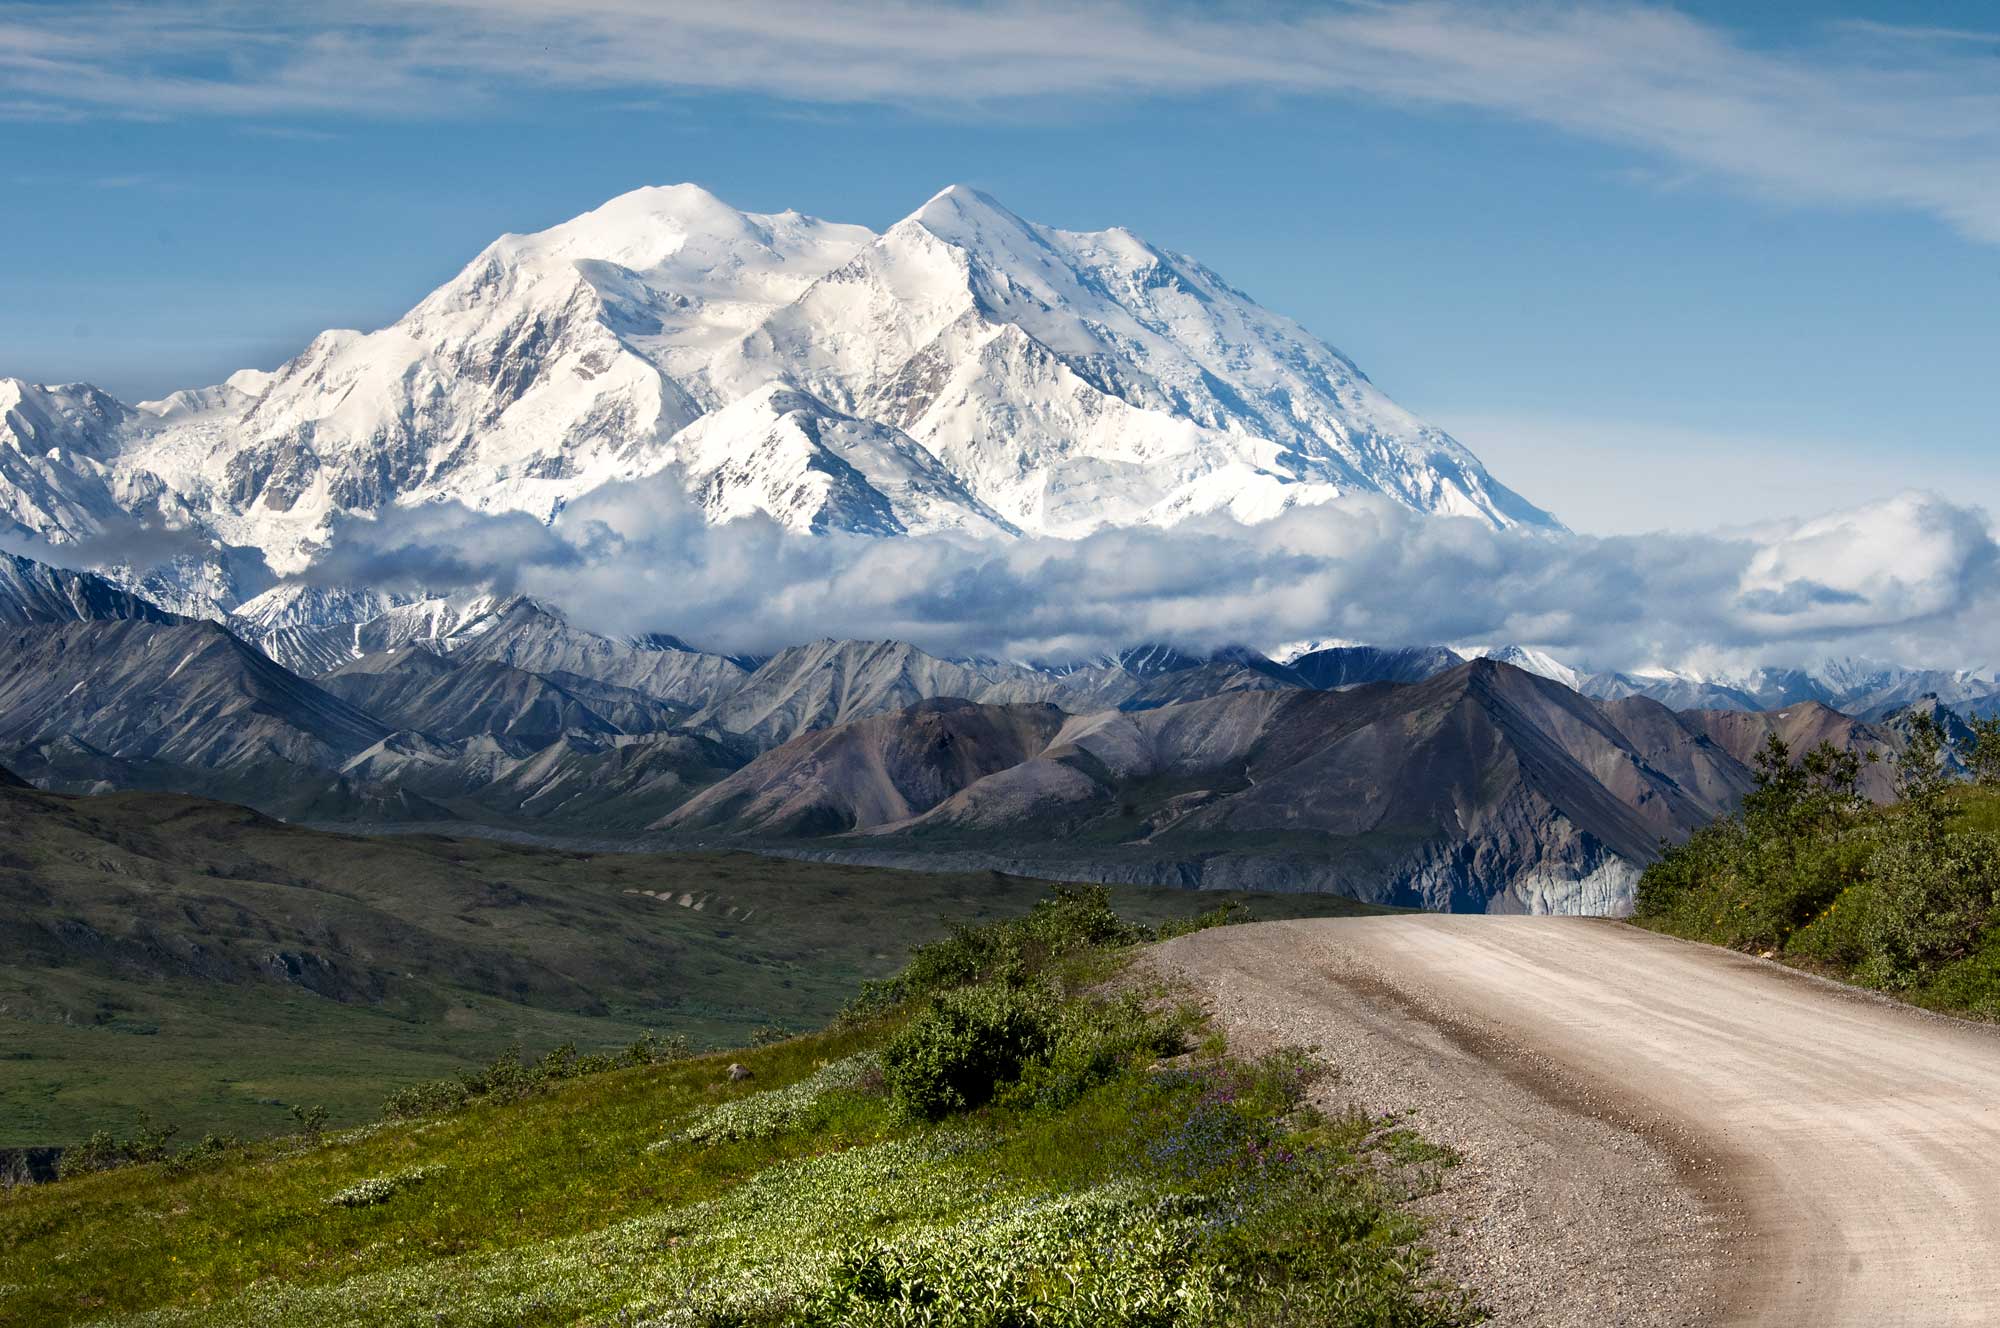 Photograph of Denali, the tallest mountain in North America. The photo shows a jagged mountain covered in now in the background, flanked by low gray hills. In the foreground, a dirt road cuts through a landscape that is green with vegetation.